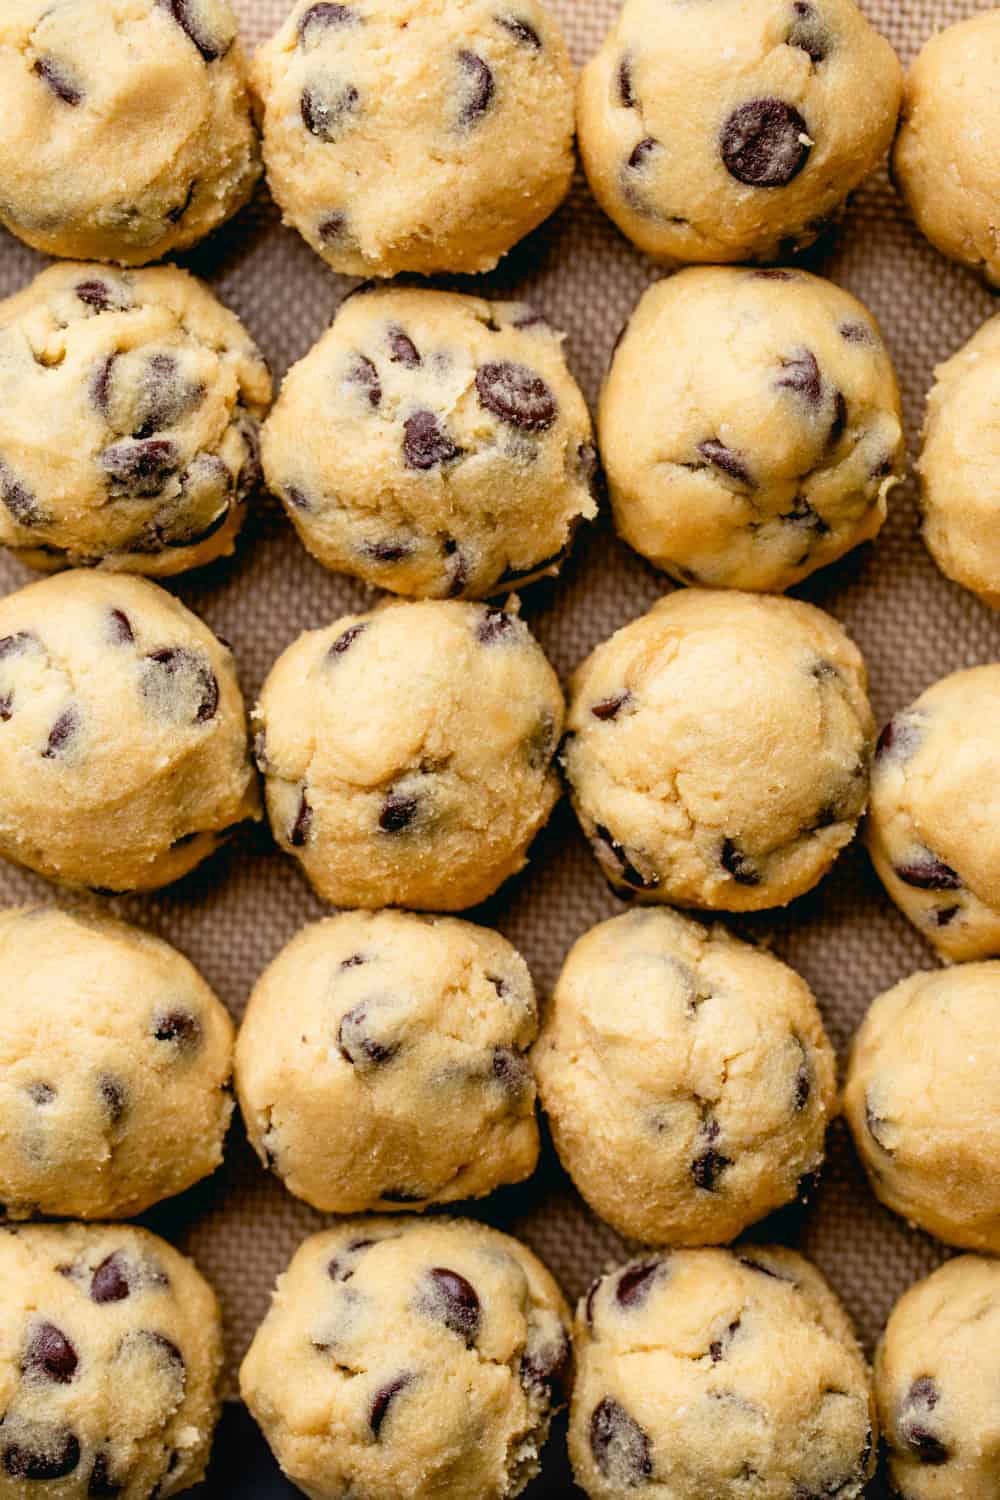 Freezing cookie dough is an easy way to be just minutes from hot, gooey, fresh-baked cookies at all times. Learn how to freeze cookie dough in this step-by-step guide!